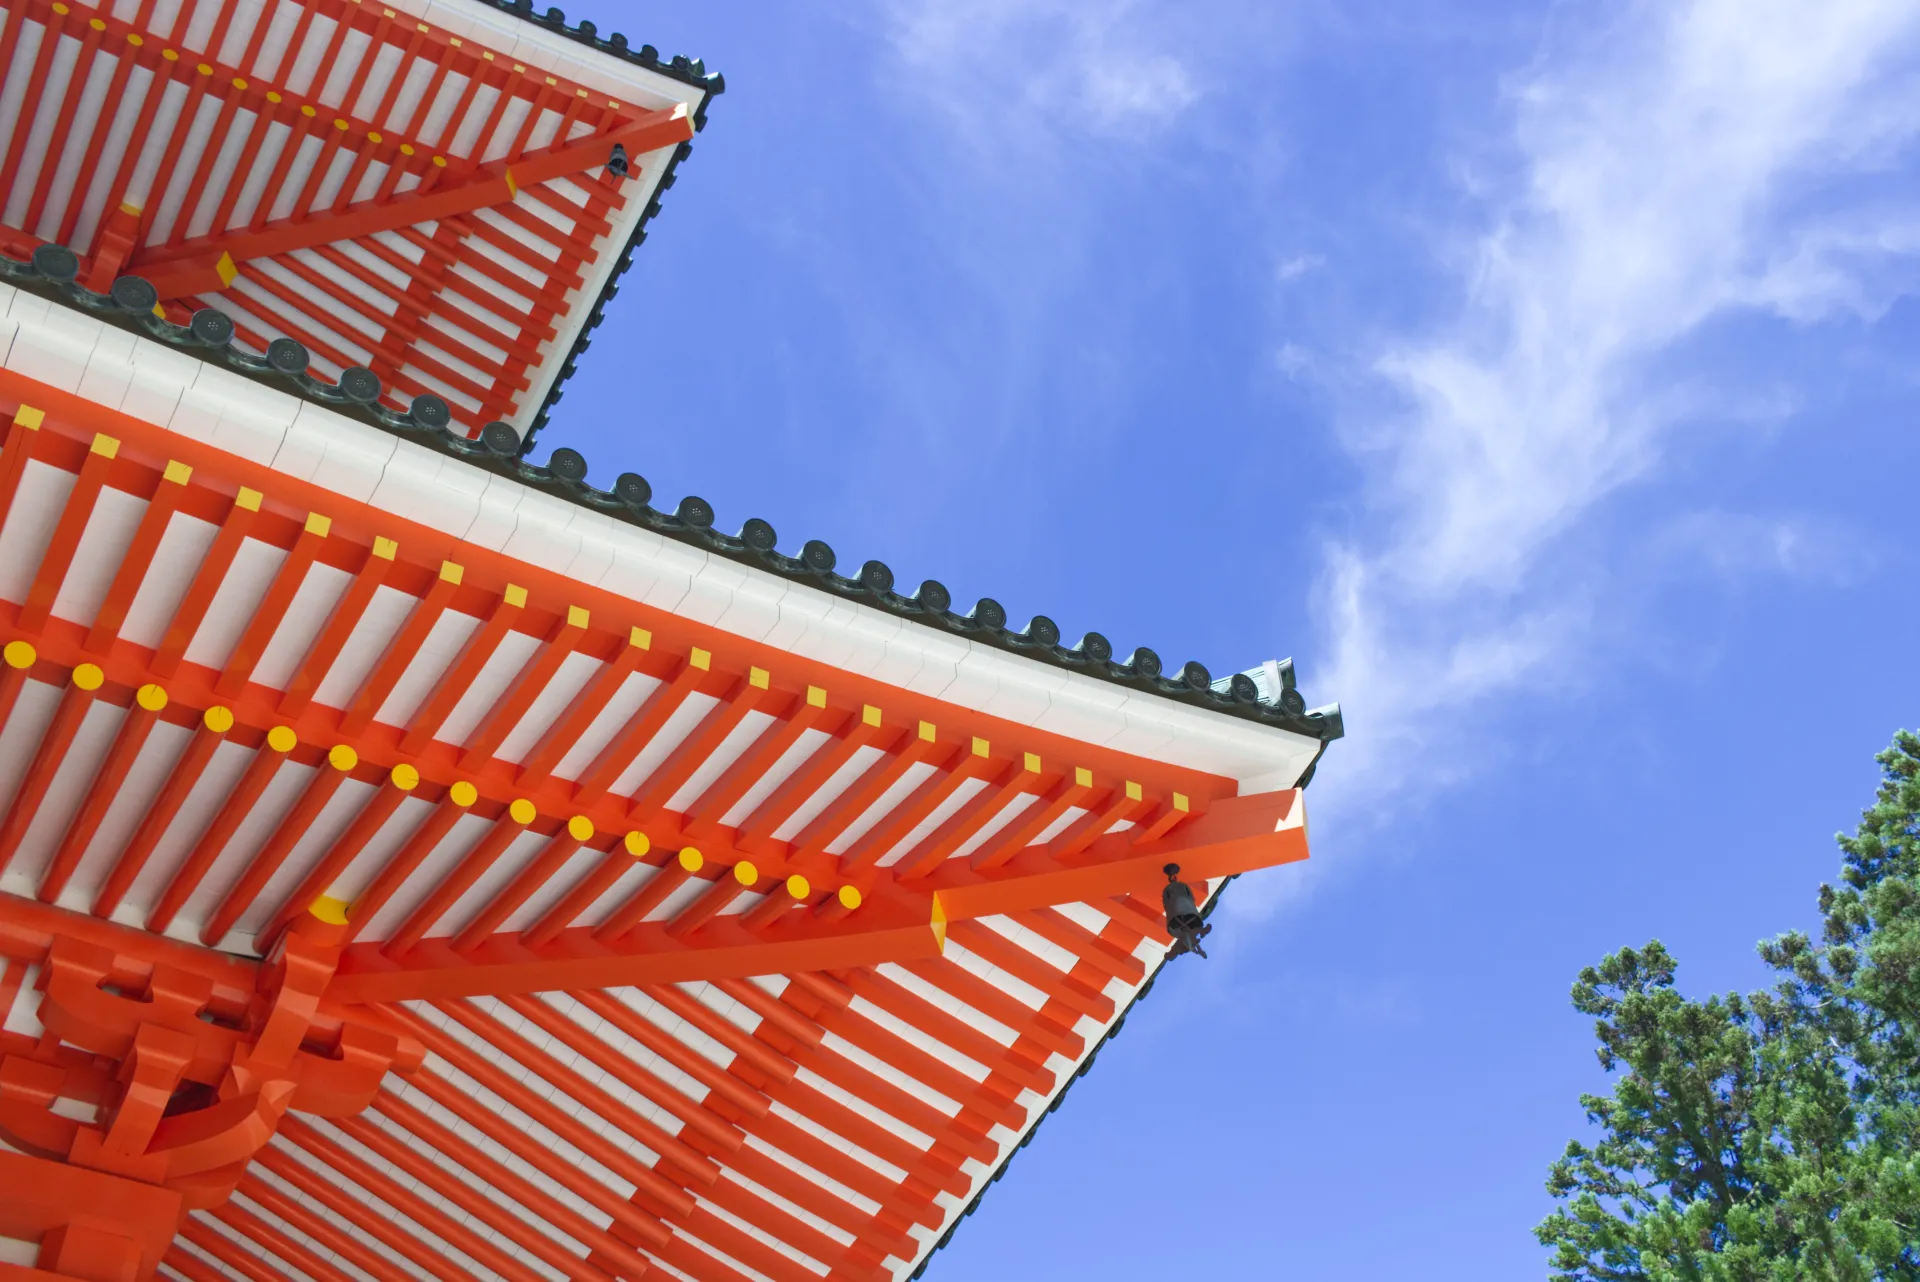 A photograph of a temple roof with sky